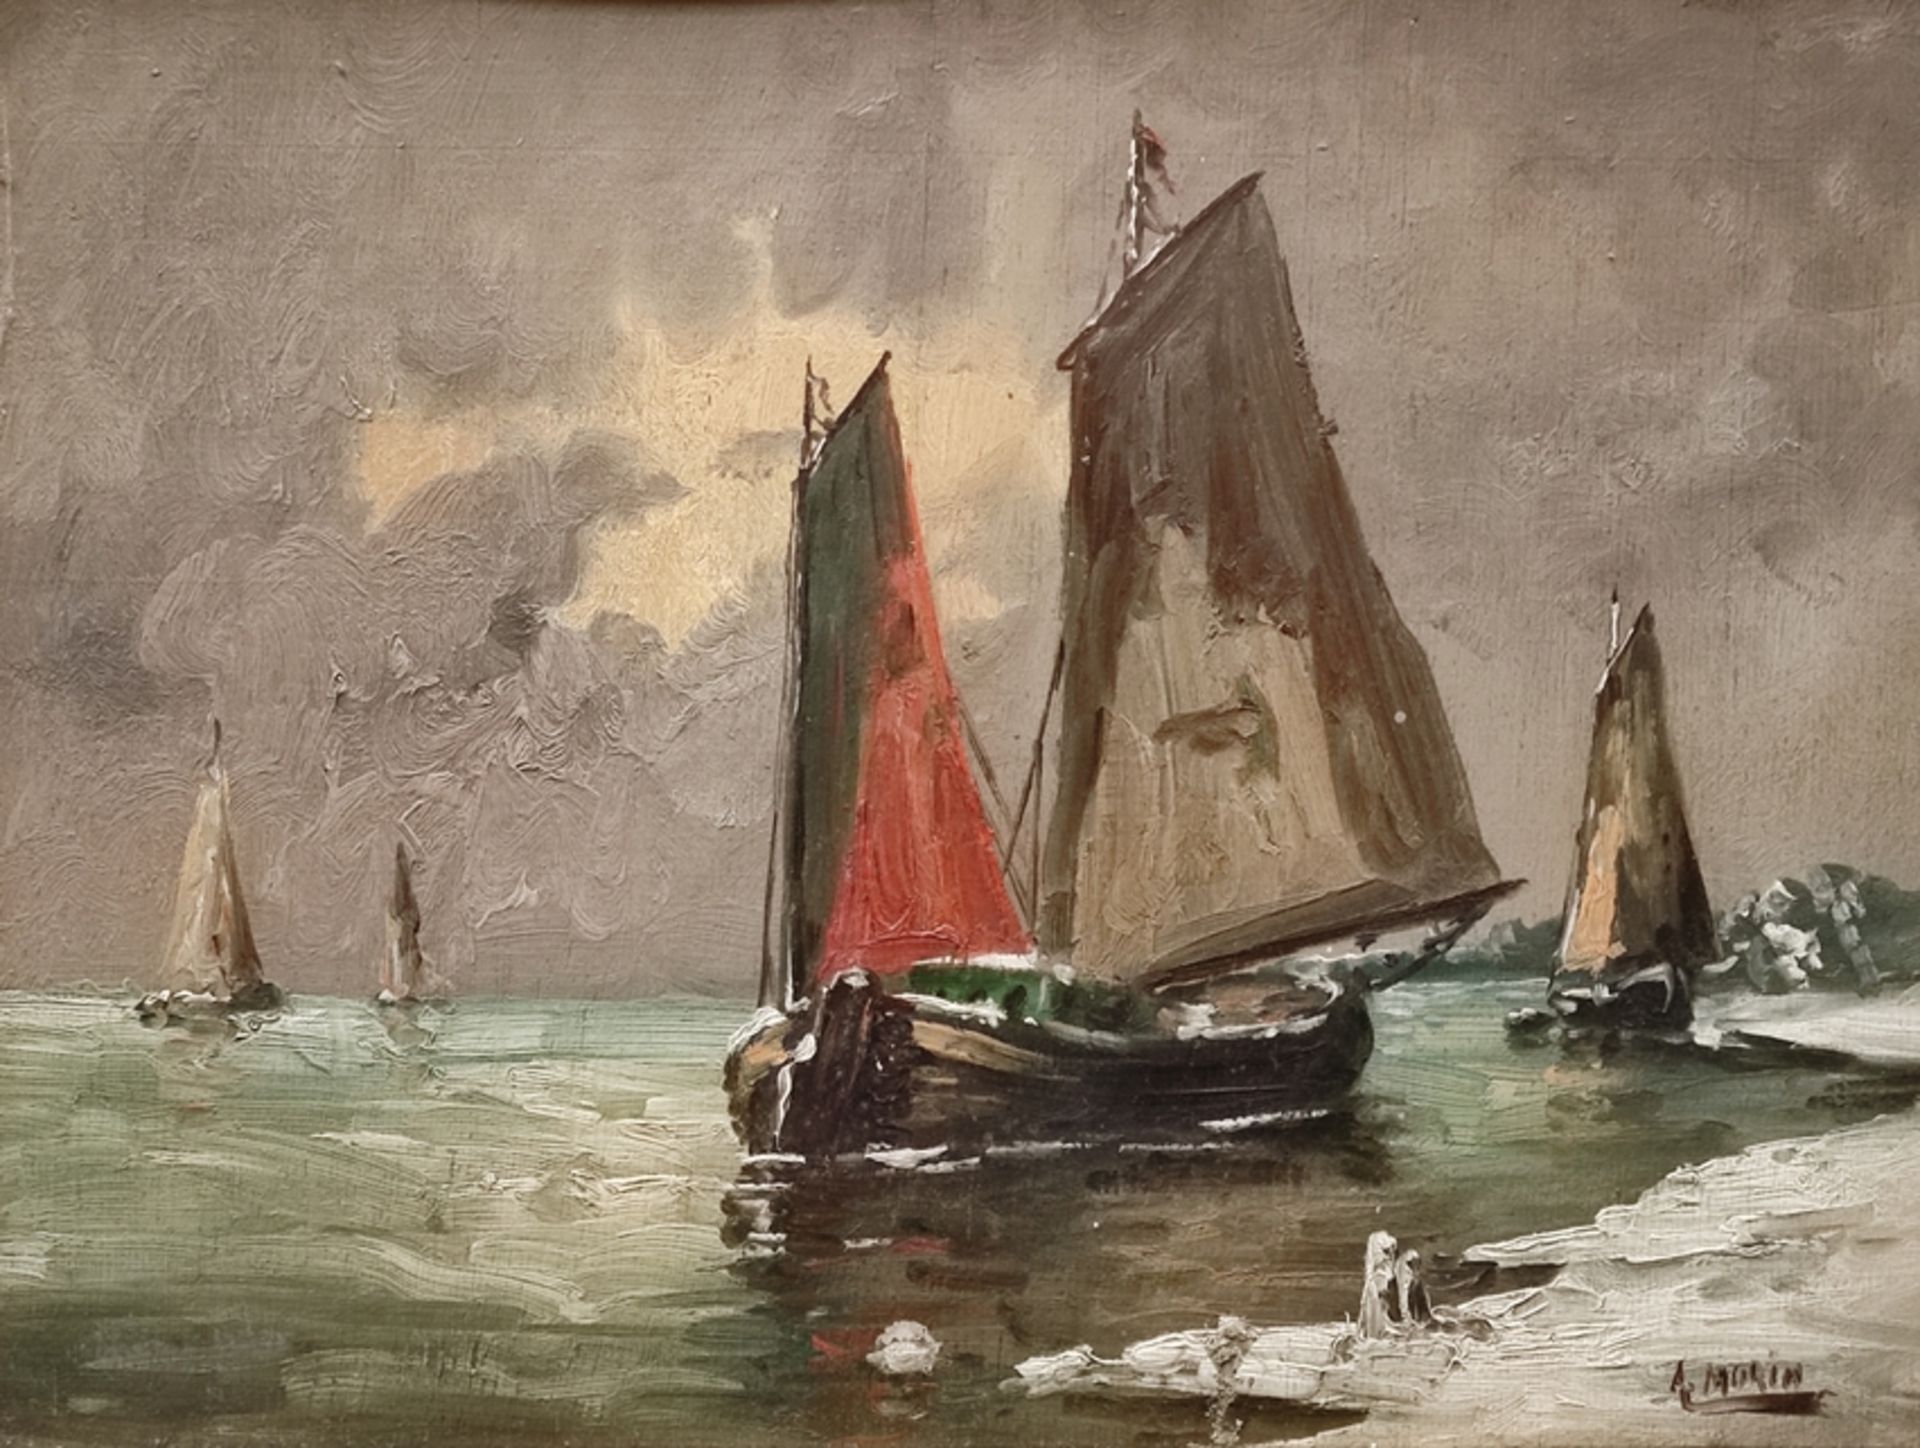 Morin, A. (19th century) "Sailing ships", near the snowy shore, oil on panel, signed lower right, 3